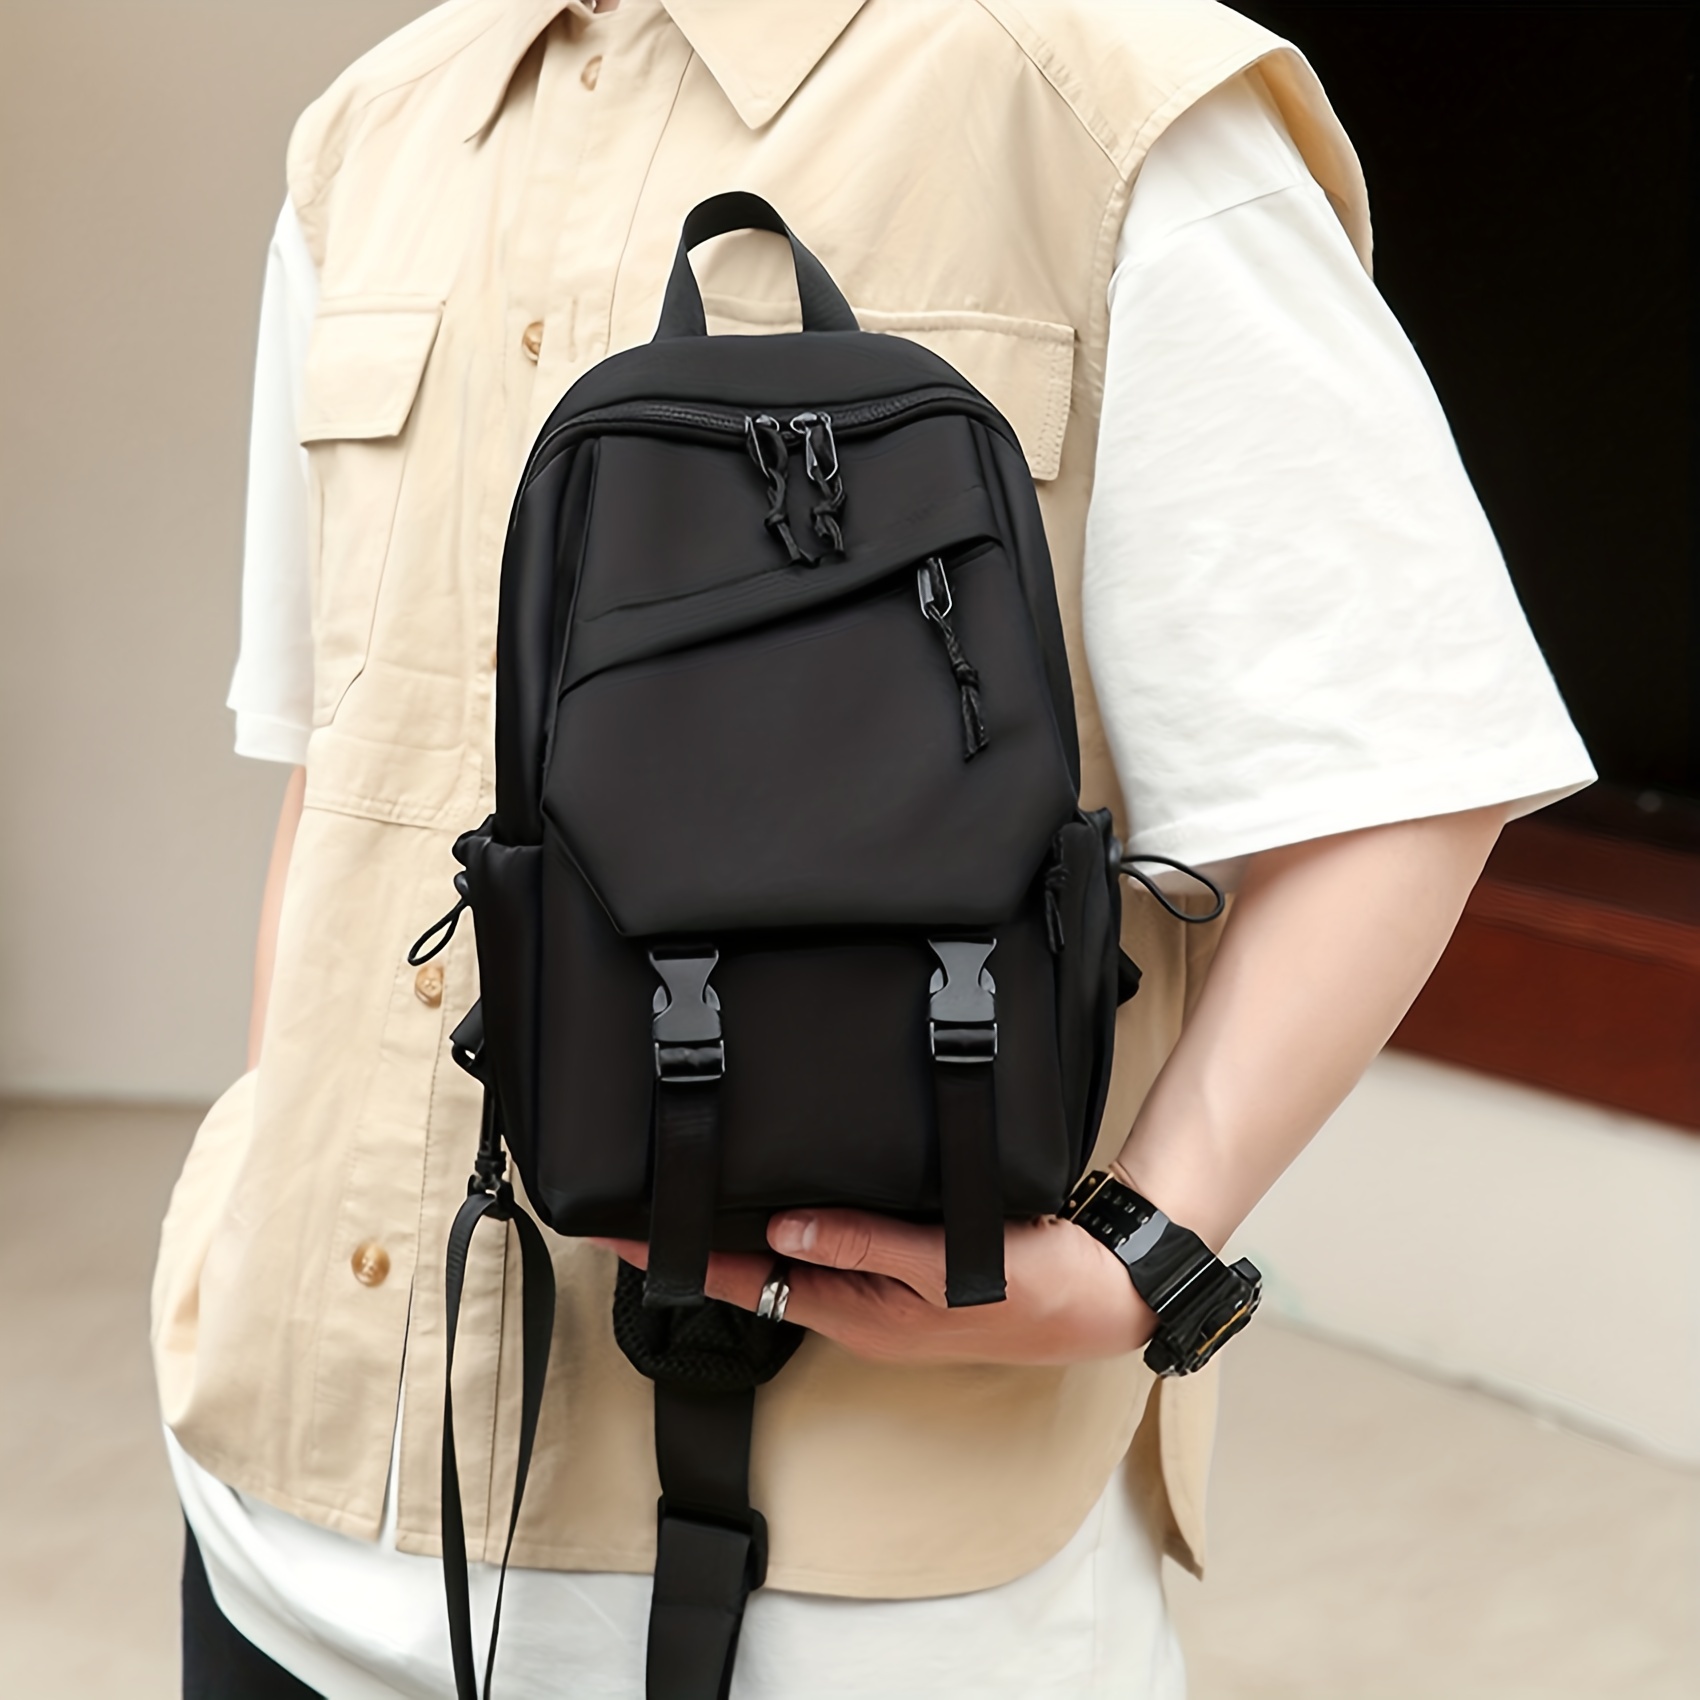 Men's New Casual Business Shoulder Bags Travel Sports Outdoor